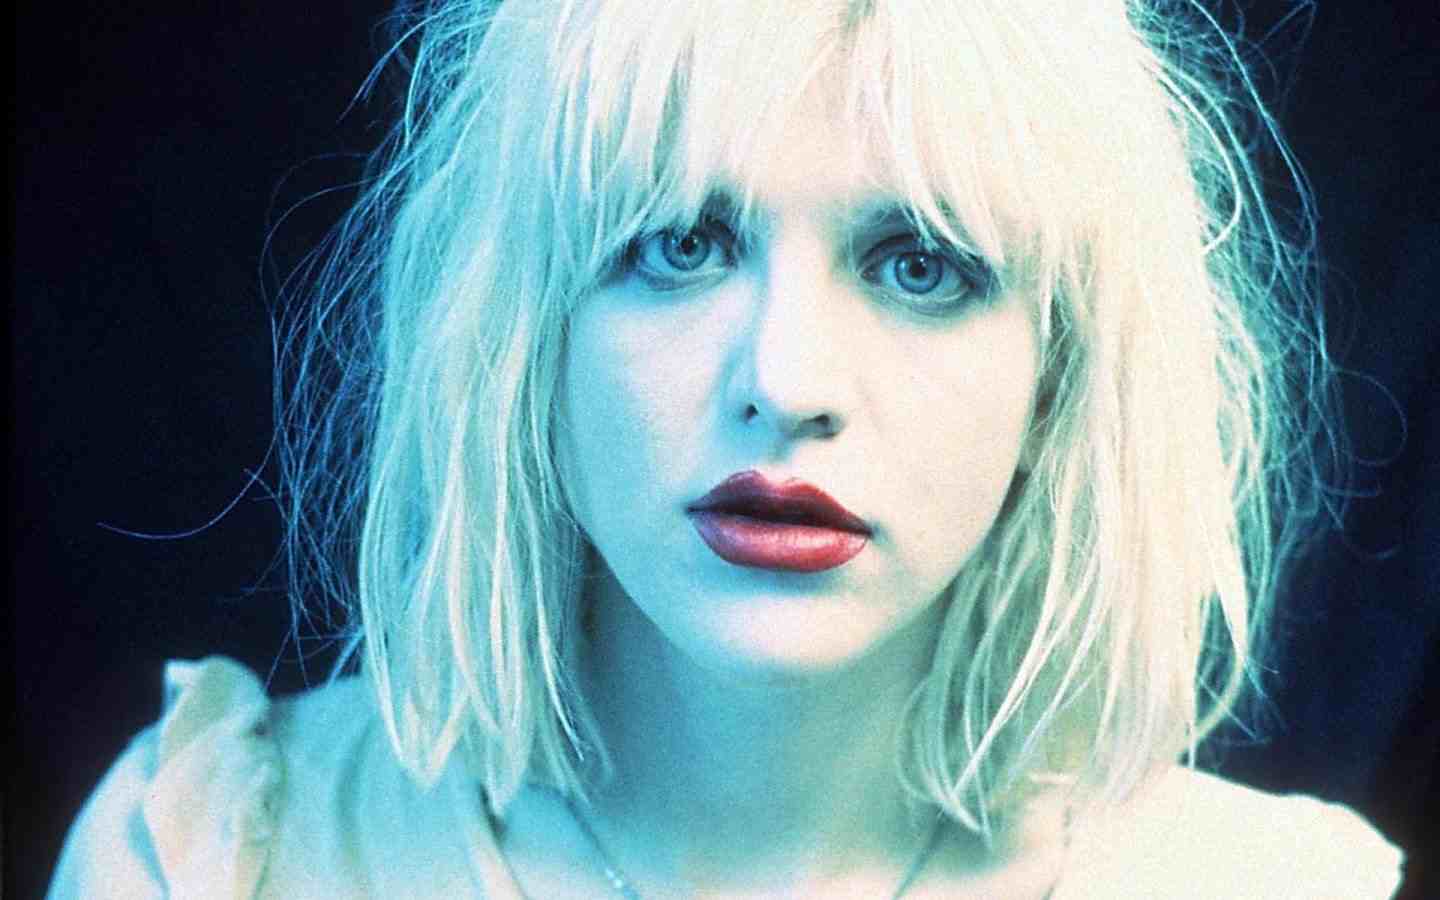 Courtney Love Joins Billie Joe Armstrong On Stage – Performs Three Covers